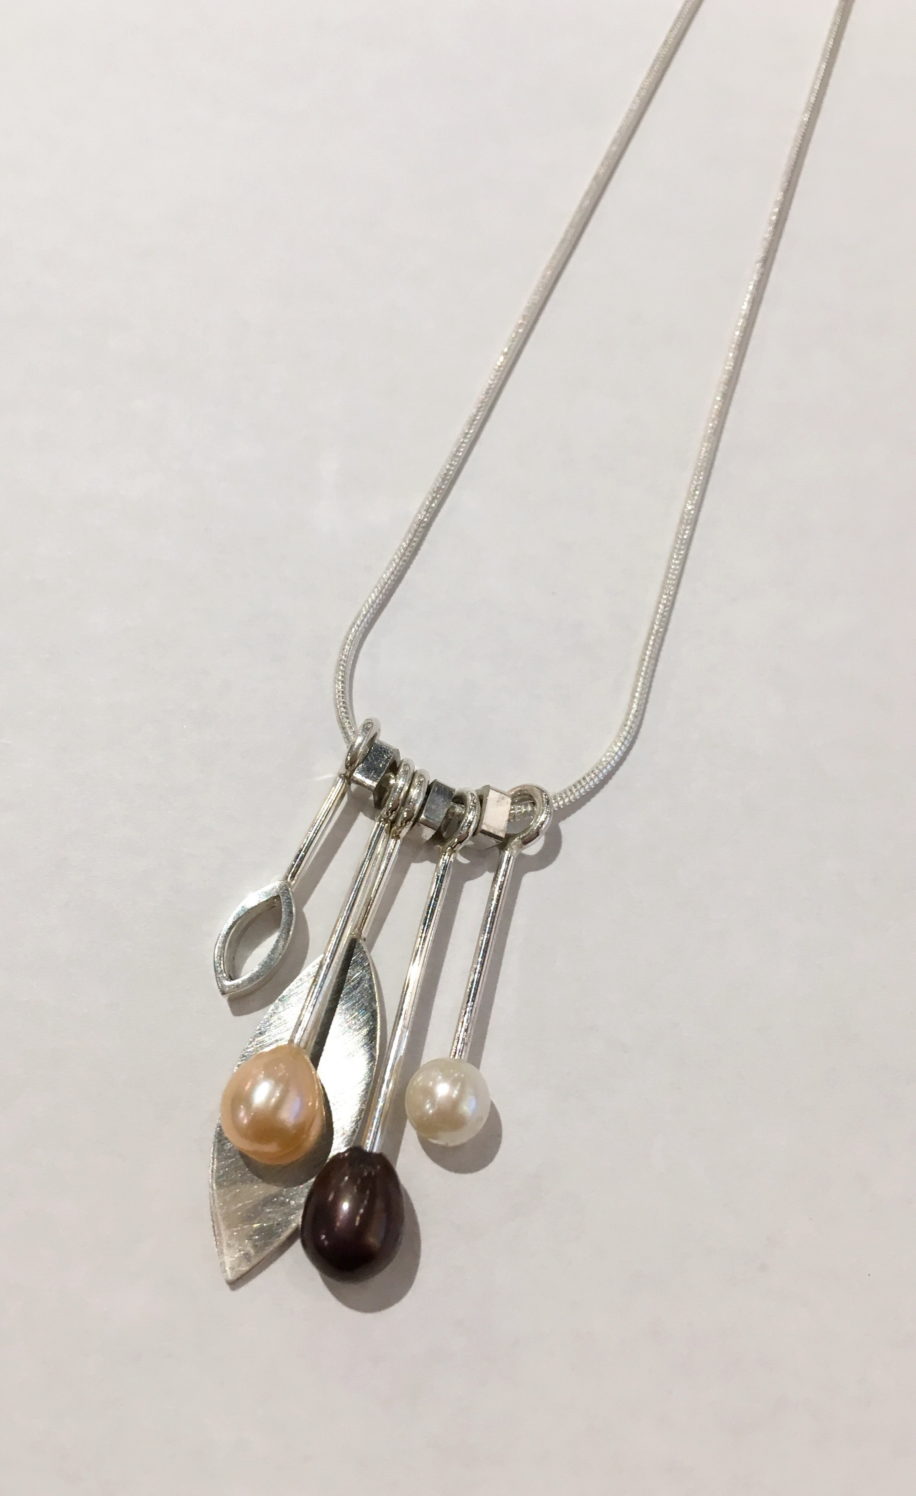 Freshwater Pearl Dangly Necklace by Brenda Roy at The Avenue Gallery, a contemporary fine art gallery in Victoria, BC, Canada.